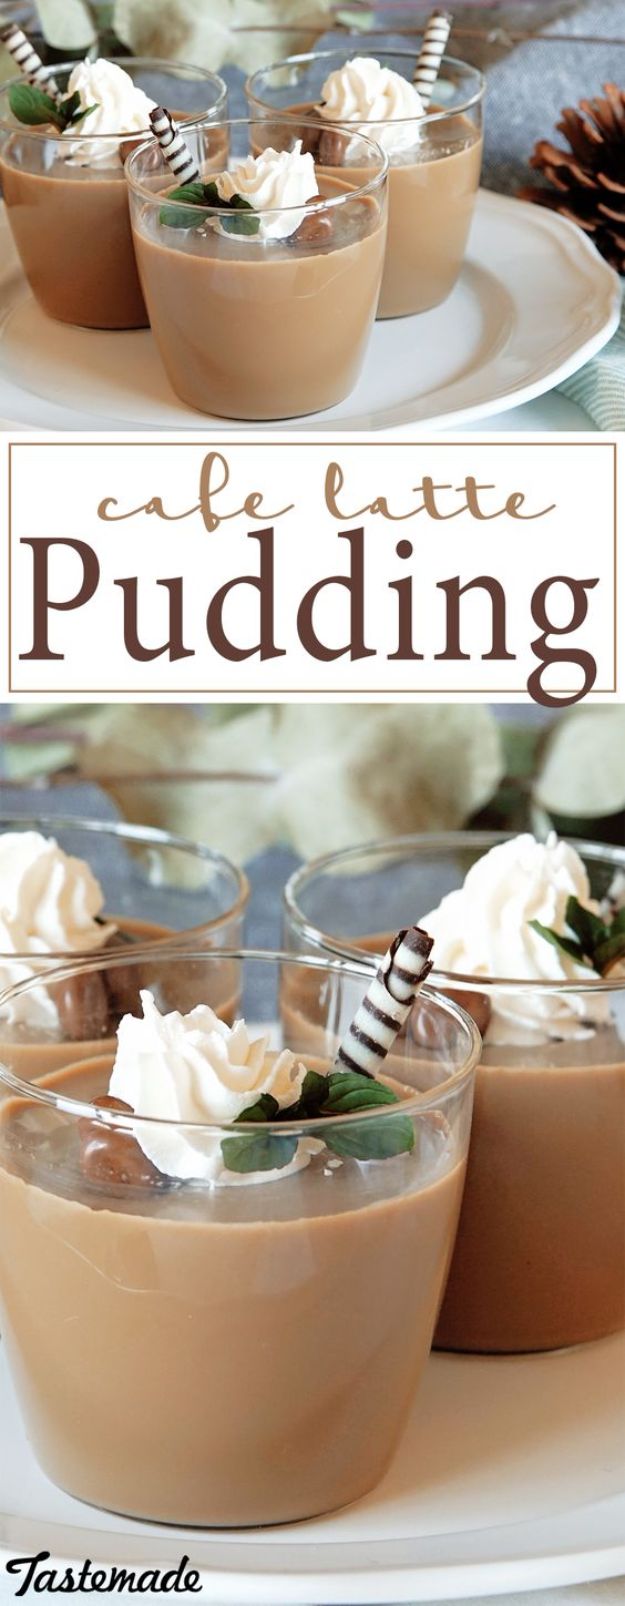 Coffee Drink Recipes - Cafe Latte Pudding - Easy Drinks and Coffees To Make At Home - Frozen, Iced, Cold Brew and Hot Coffee Recipe Ideas - Sugar Free, Low Fat and Blended Drinks - Mocha, Frappucino, Caramel, Chocolate, Latte and Americano - Flavored Coffee, Liqueur and After Dinner Drinks With Alcohol, Dessert Ideas for Parties #coffeedrinks #coffeerecipes #coffee #drinkrecipes